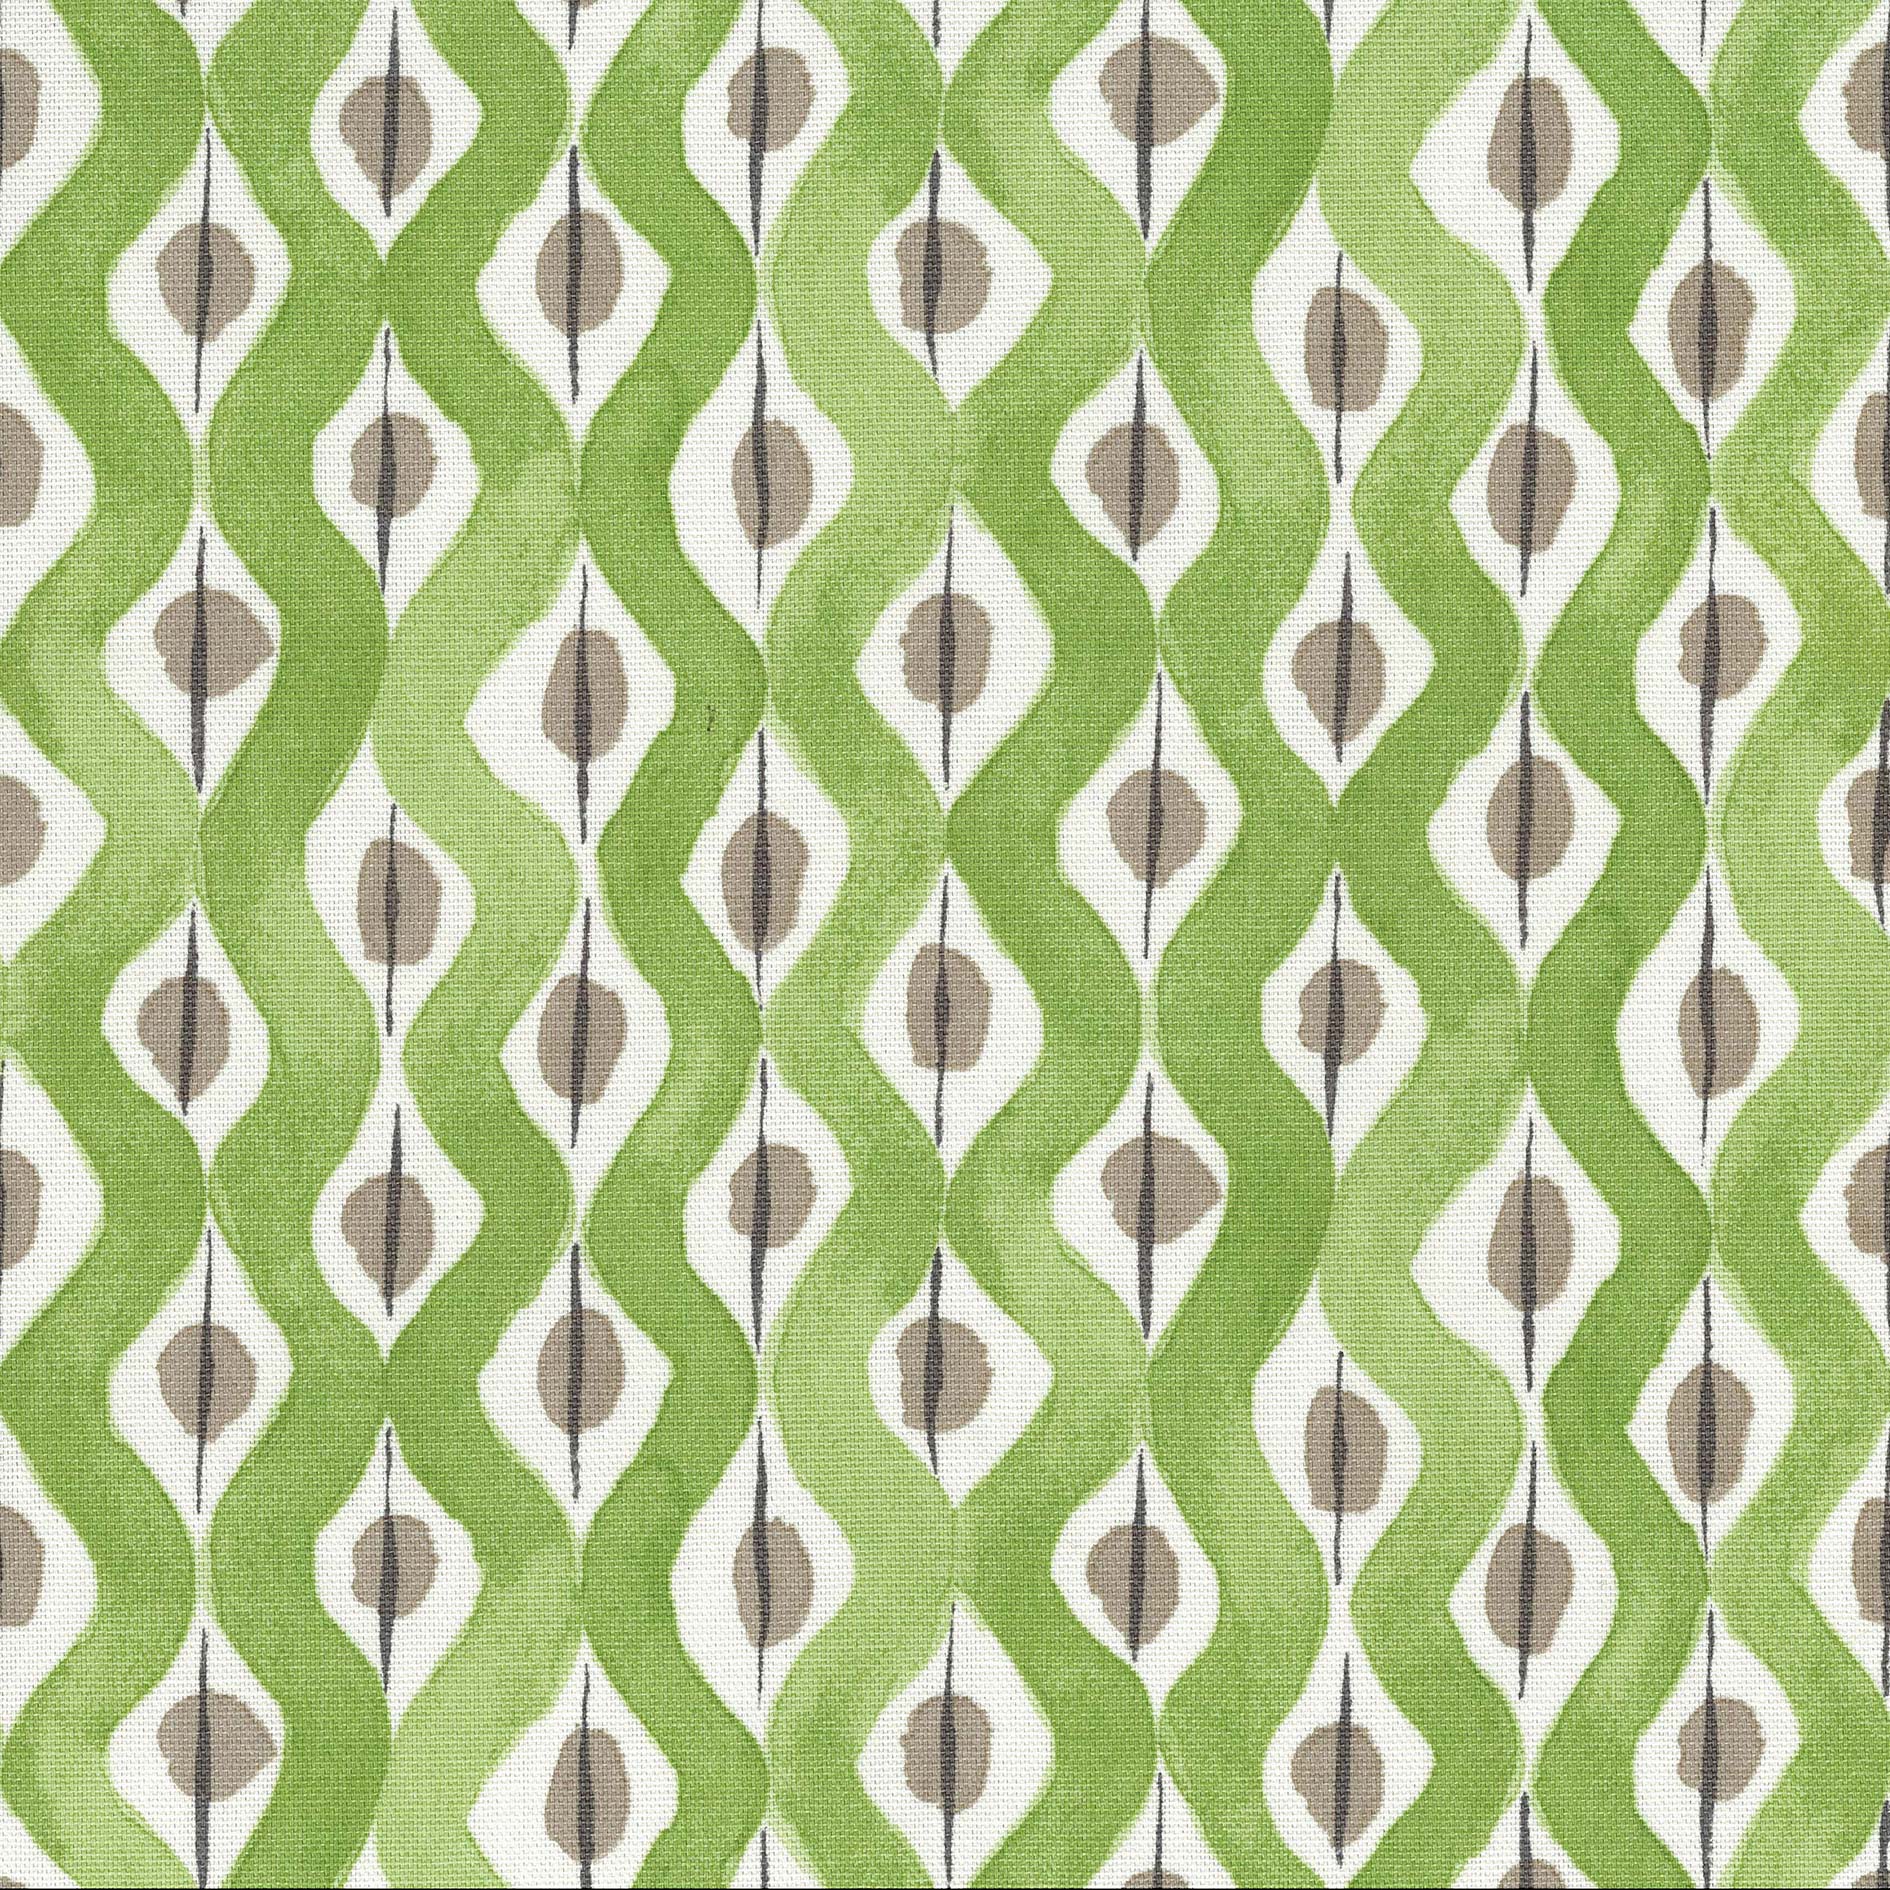 Nina Campbell Fabric - Les Rêves Beau Rivage Green/Beige NCF4295-02